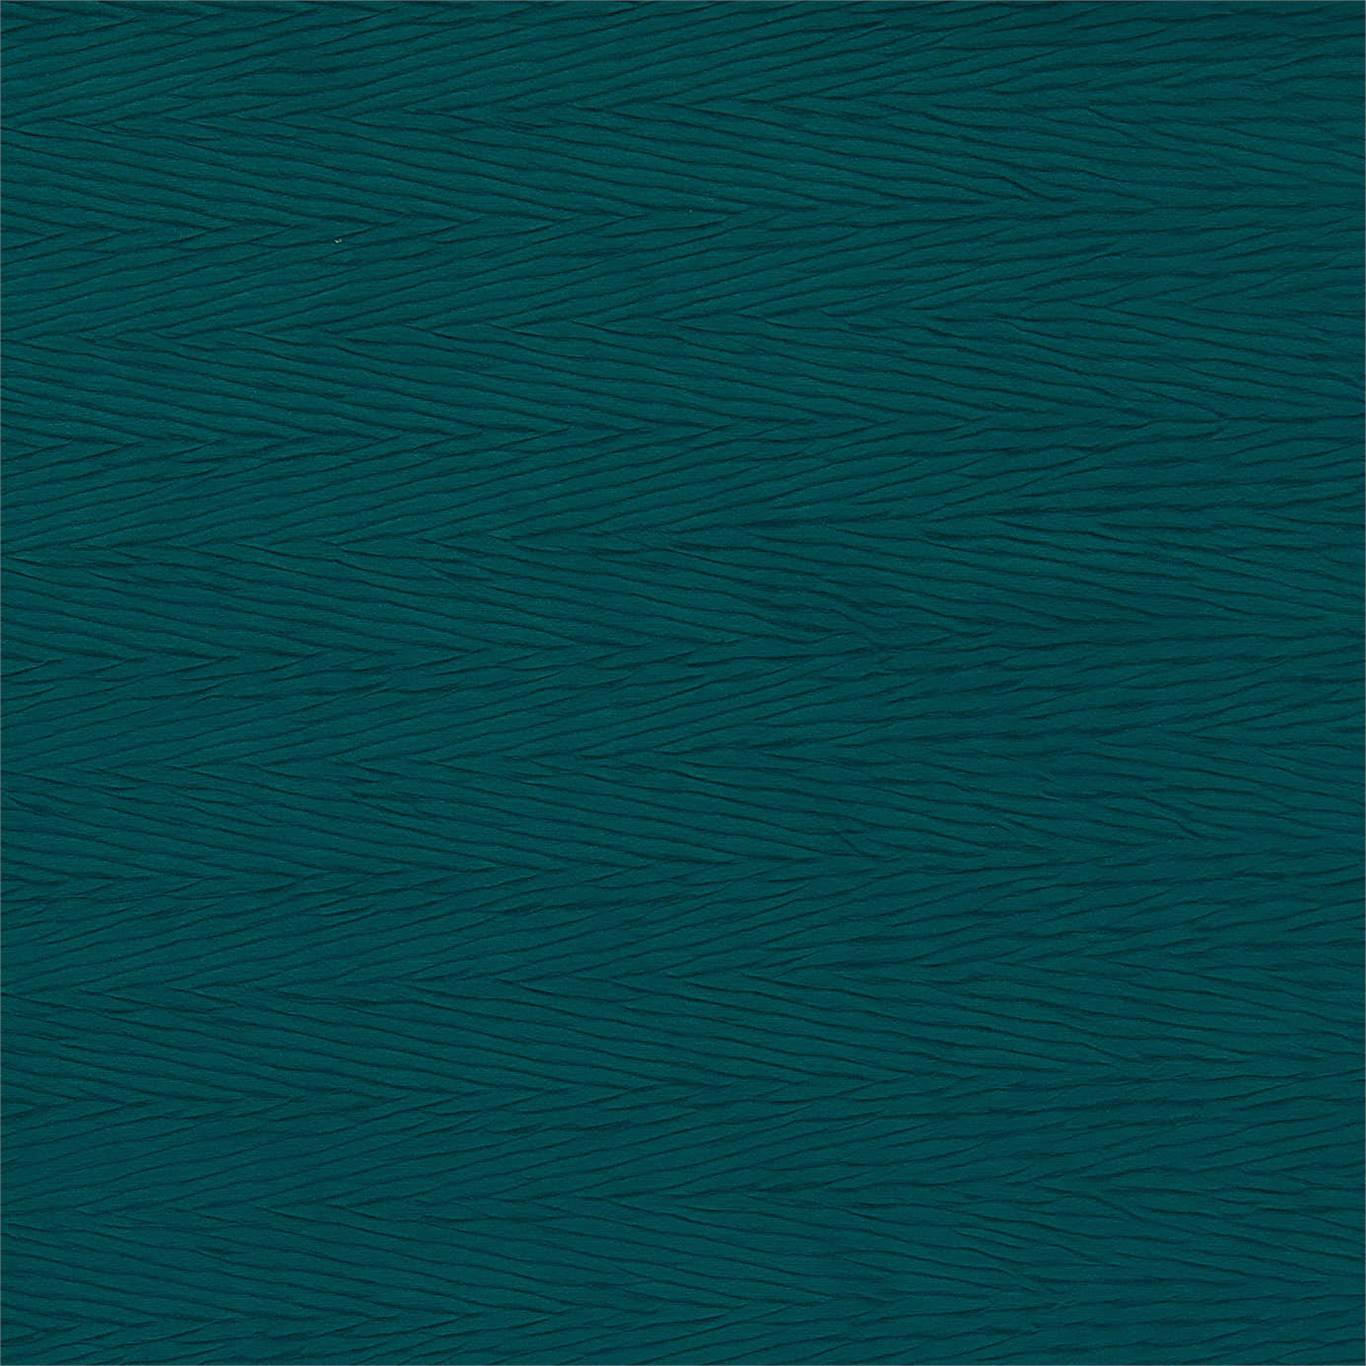 Florio Teal Fabric by HAR